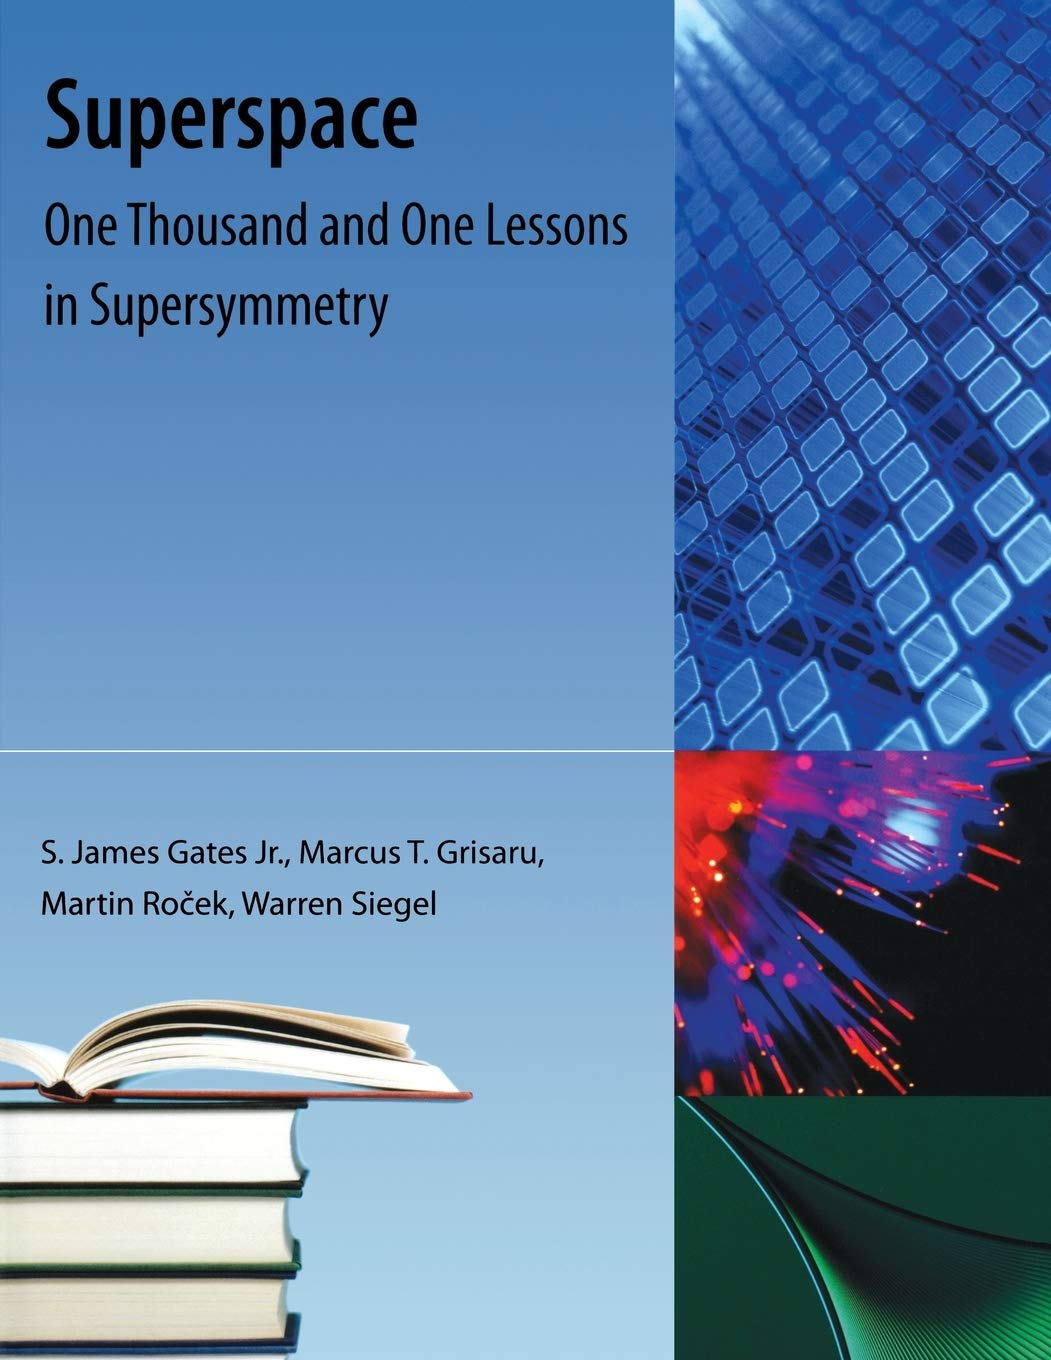 Superspace: One Thousand and One Lessons in Supersymmetry (Frontiers in Physics)